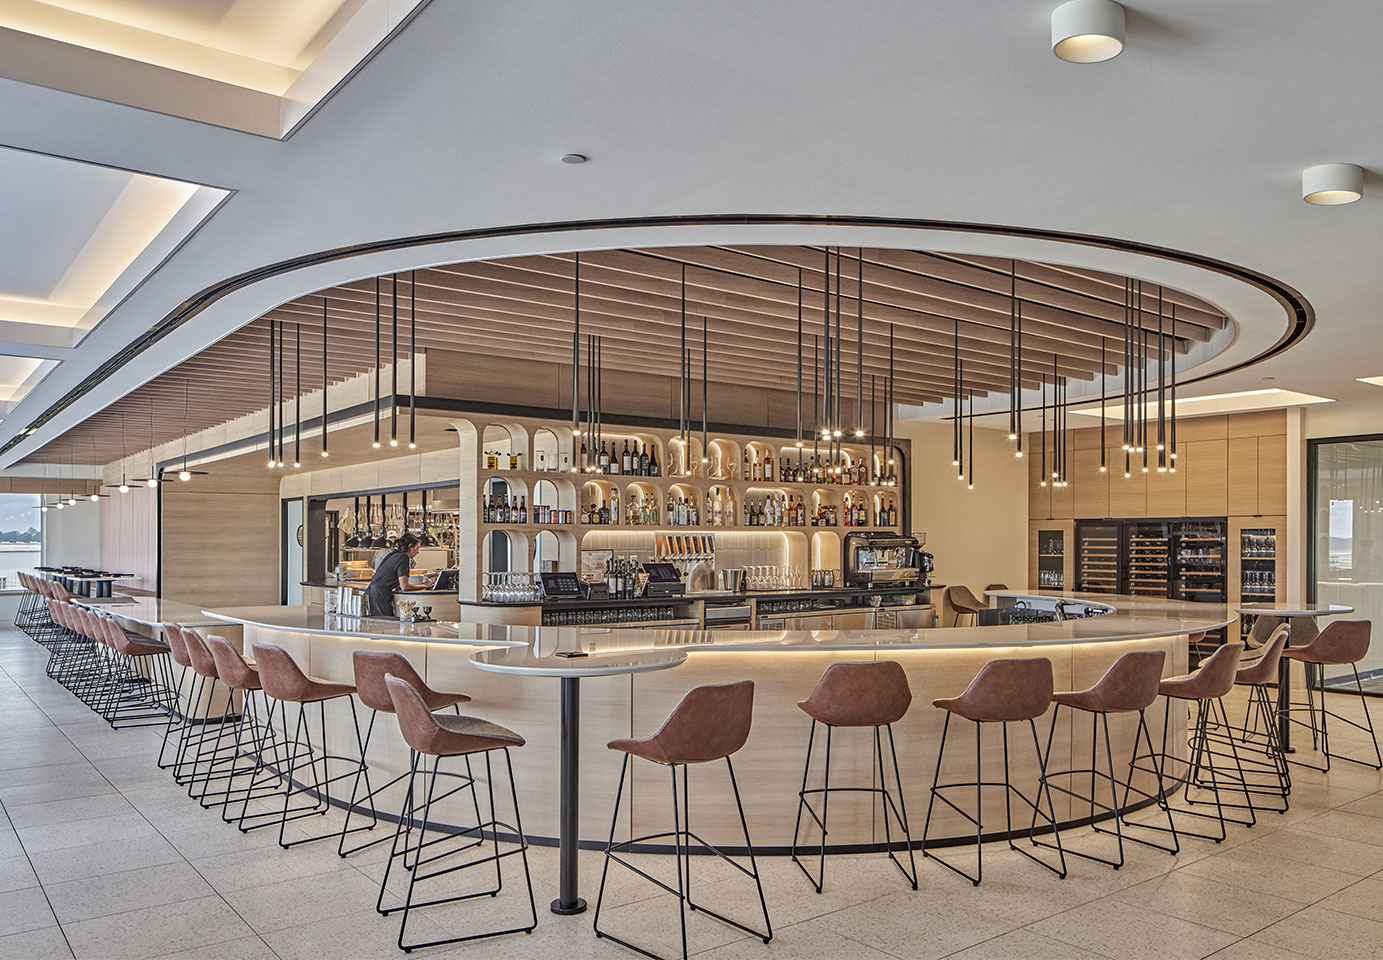 Minimalism and comfort: Vibia lights up a restaurant with view of Florida